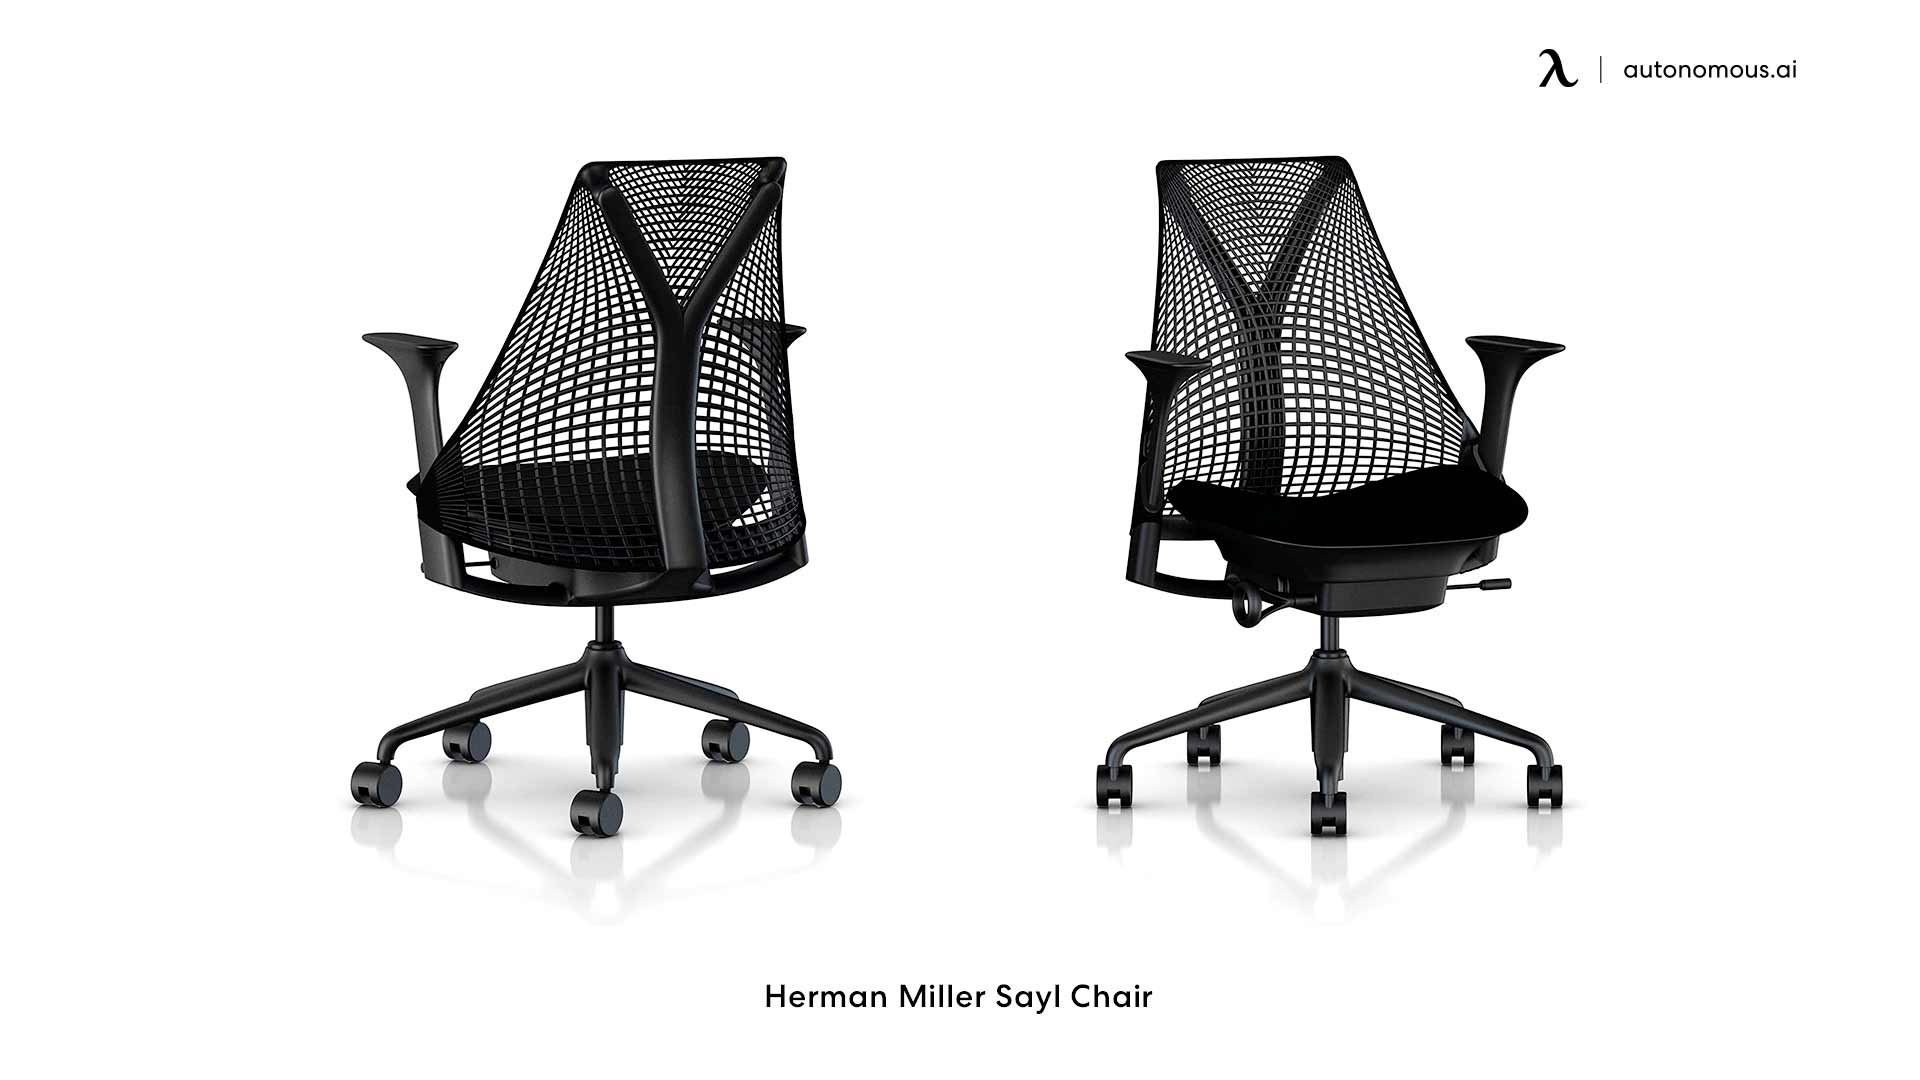 Herman Miller Sayl therapeutic office chair